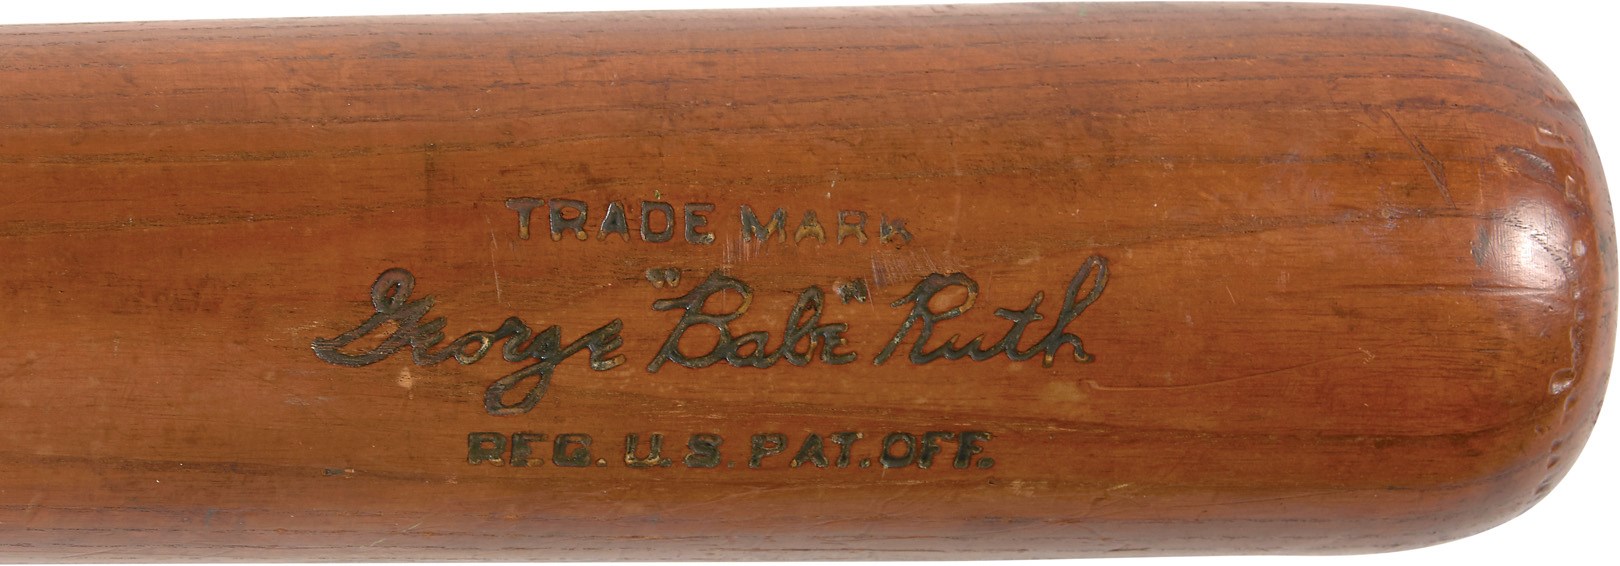 - 1932 Babe Ruth Game Used Bat with "Called Shot" Consideration (PSA/DNA 10)